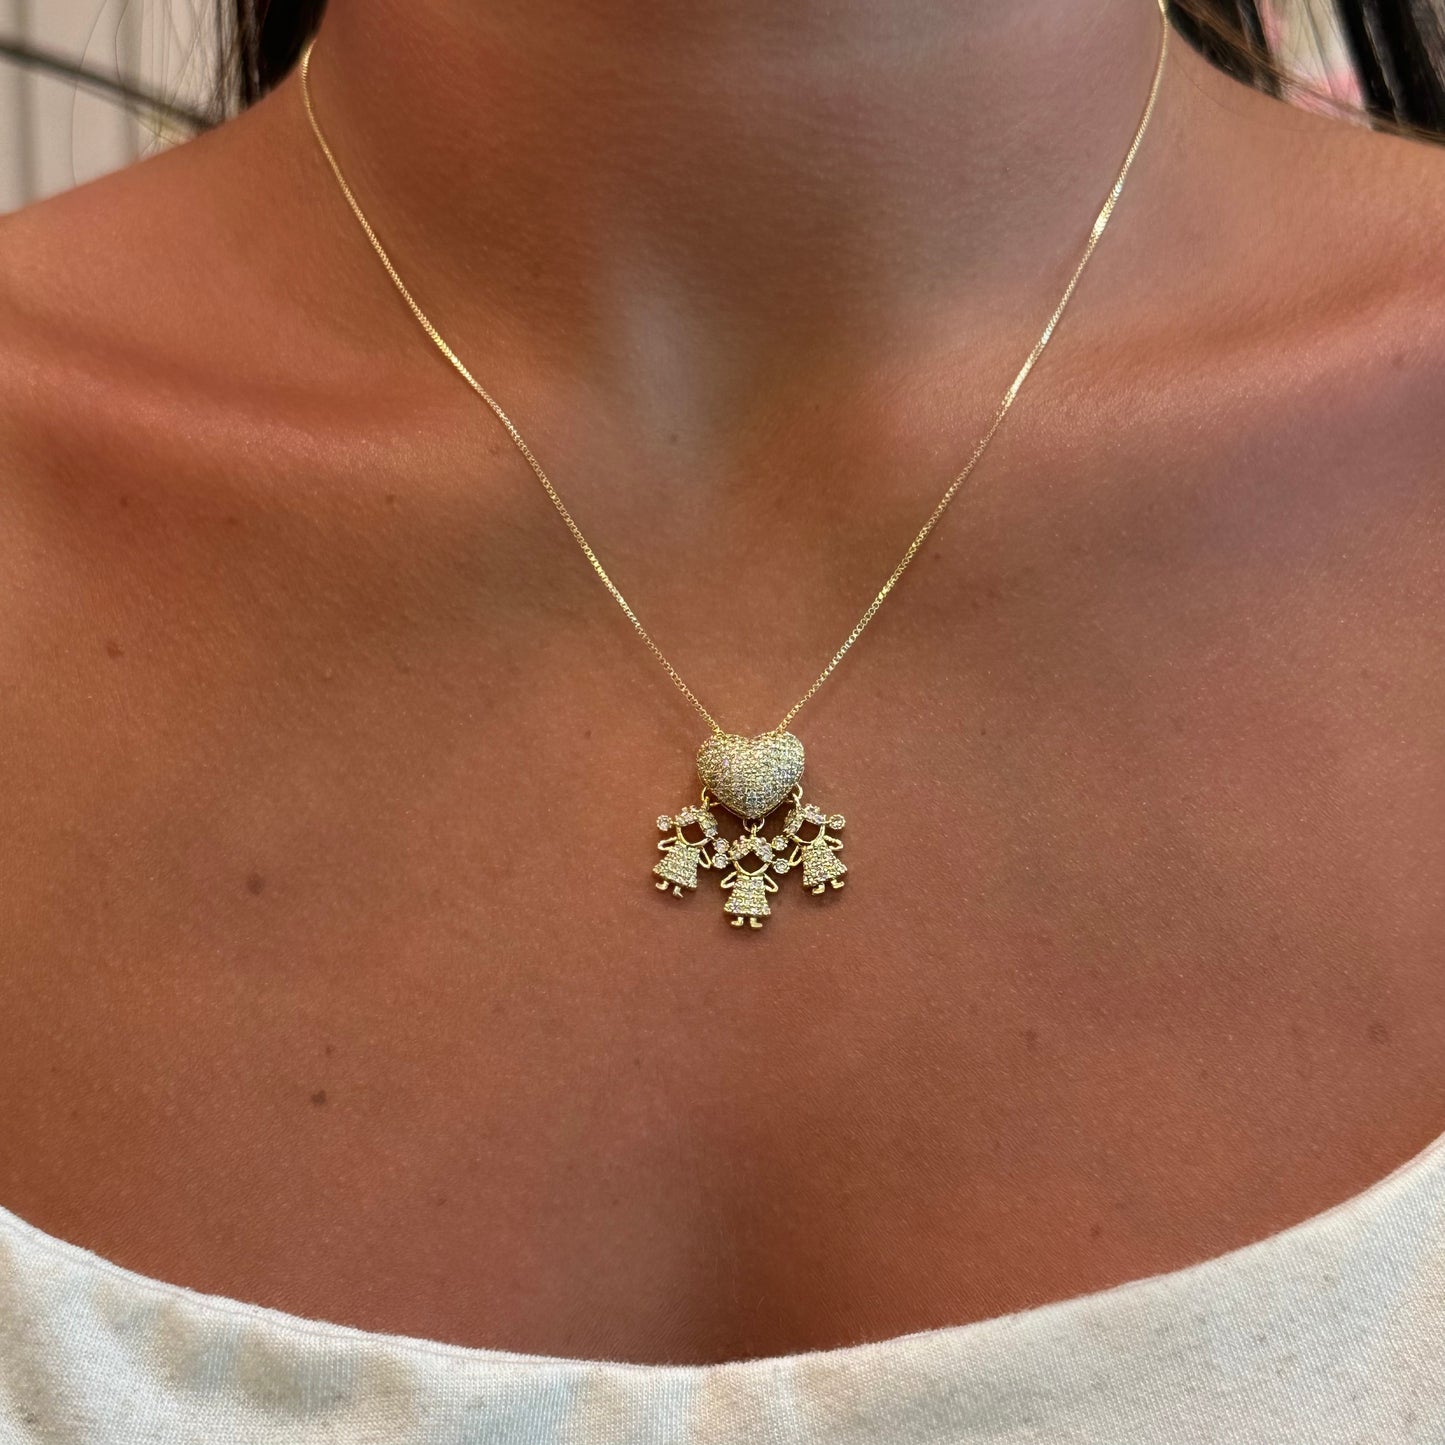 3 GIRLS PENDANT NECKLACE | 18K Gold Plated